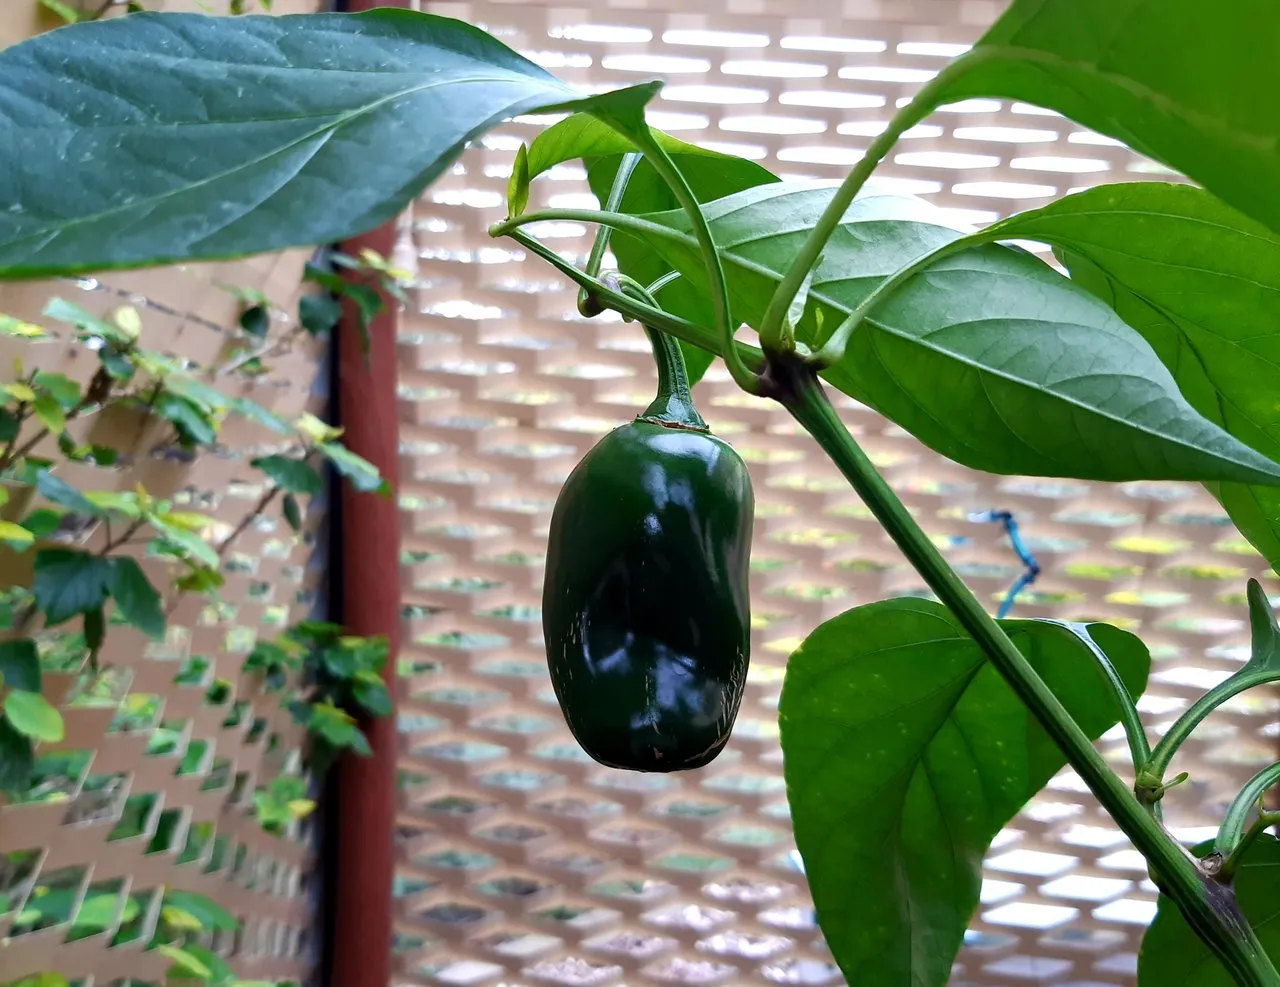 Huge jalapeño! I didn't know they could get so big